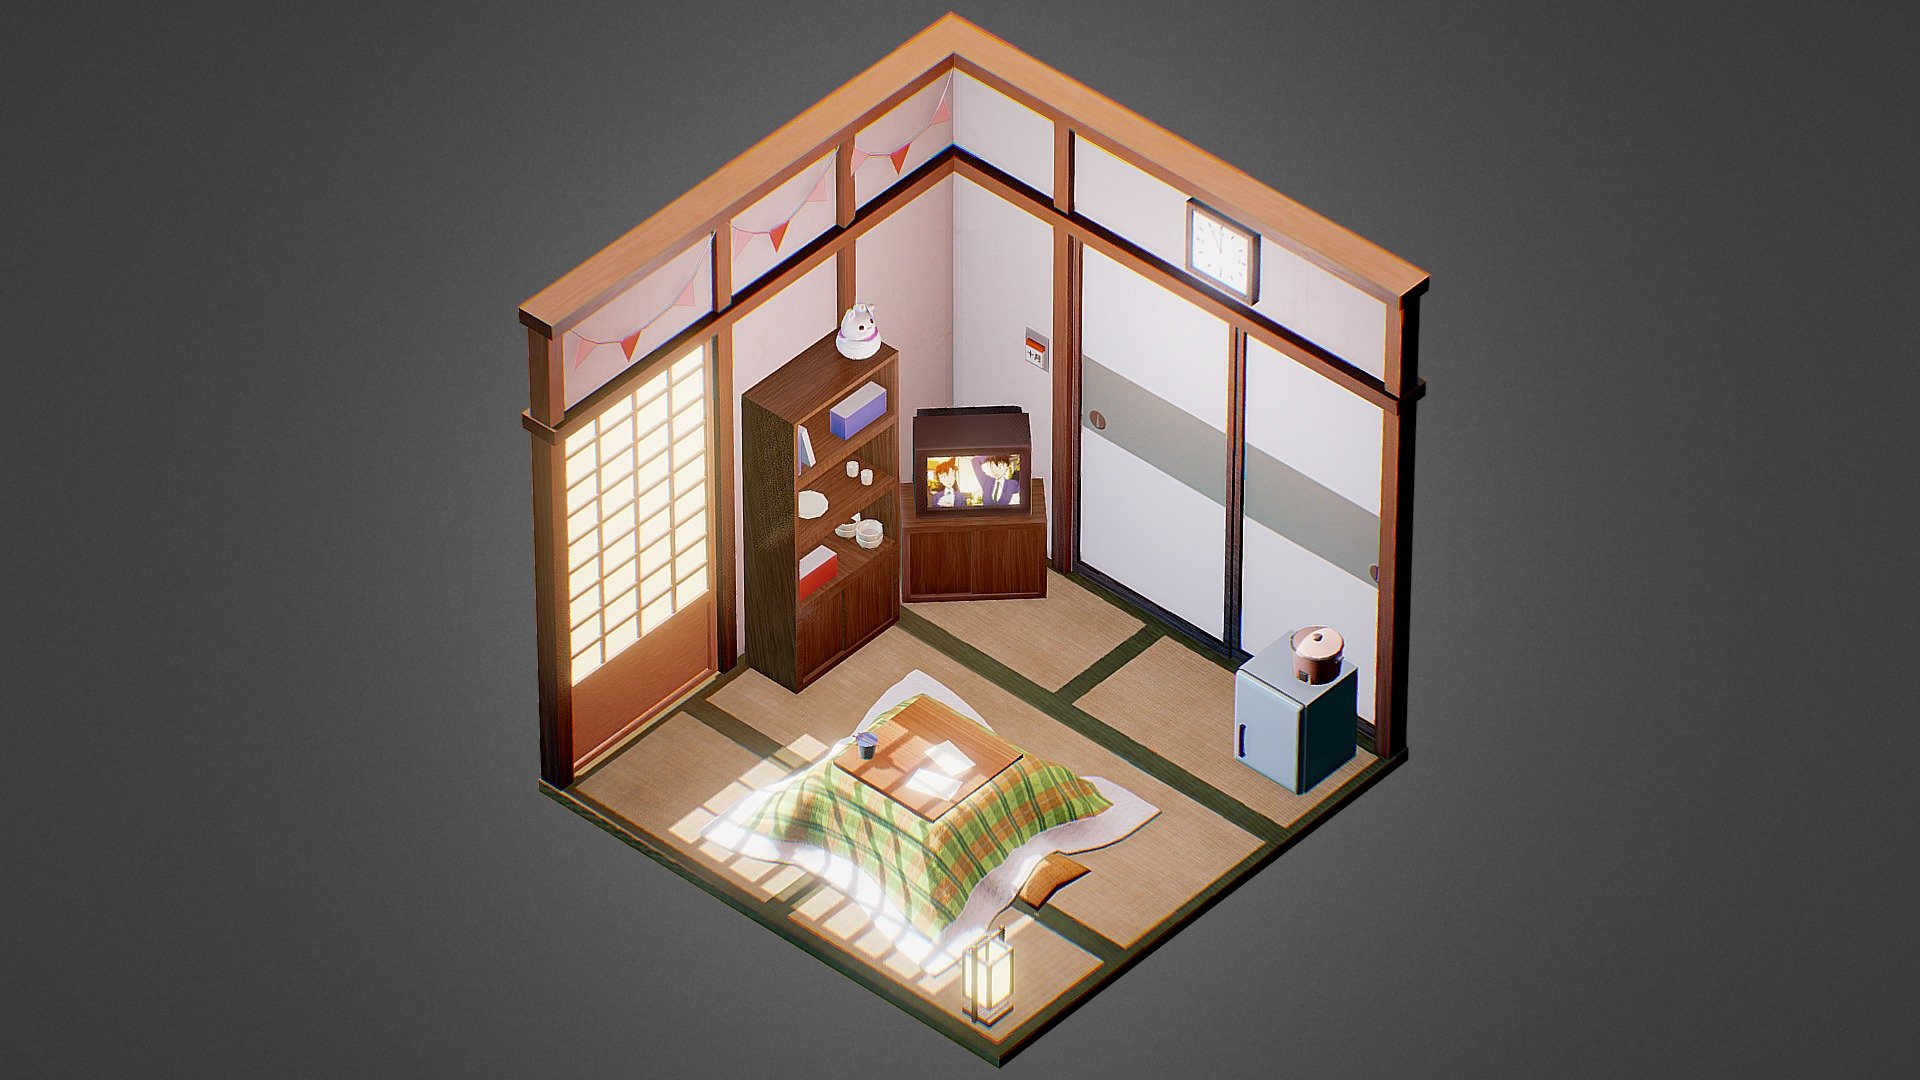 My entry for the Low Poly Challenge: Isometric Room
Modeled in Maya
Textured in substance Painter


Isometric2020Challenge - Isometric Japanese Room - 3D model by Anna K-ski (@anna-kski) 3d model